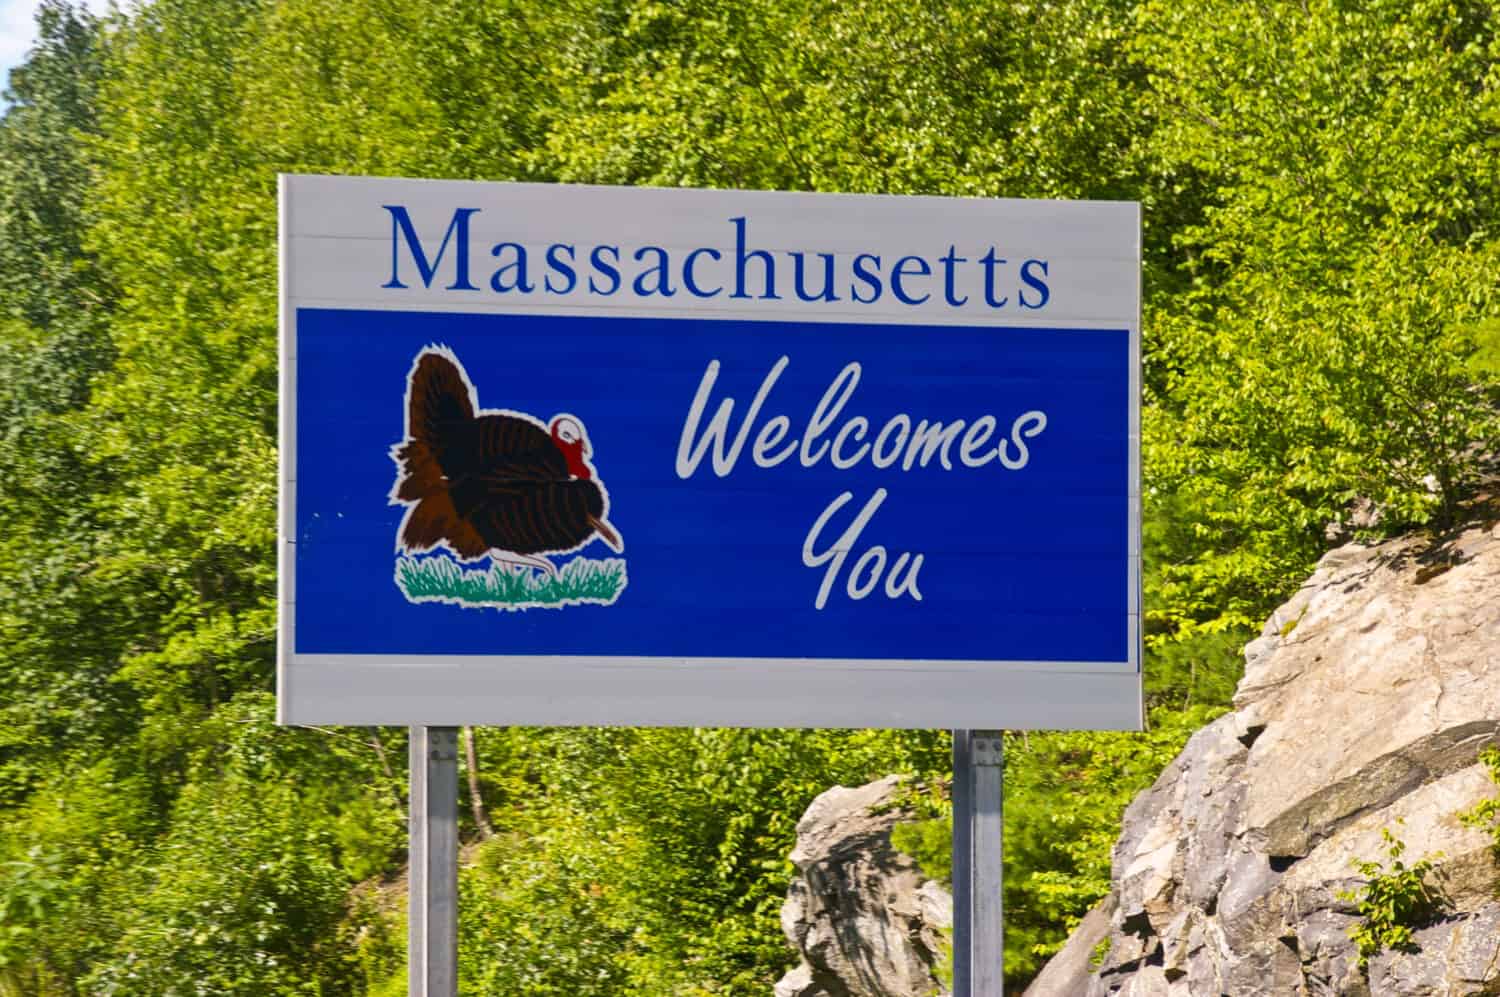 Massachusetts Welcomes You road sign.